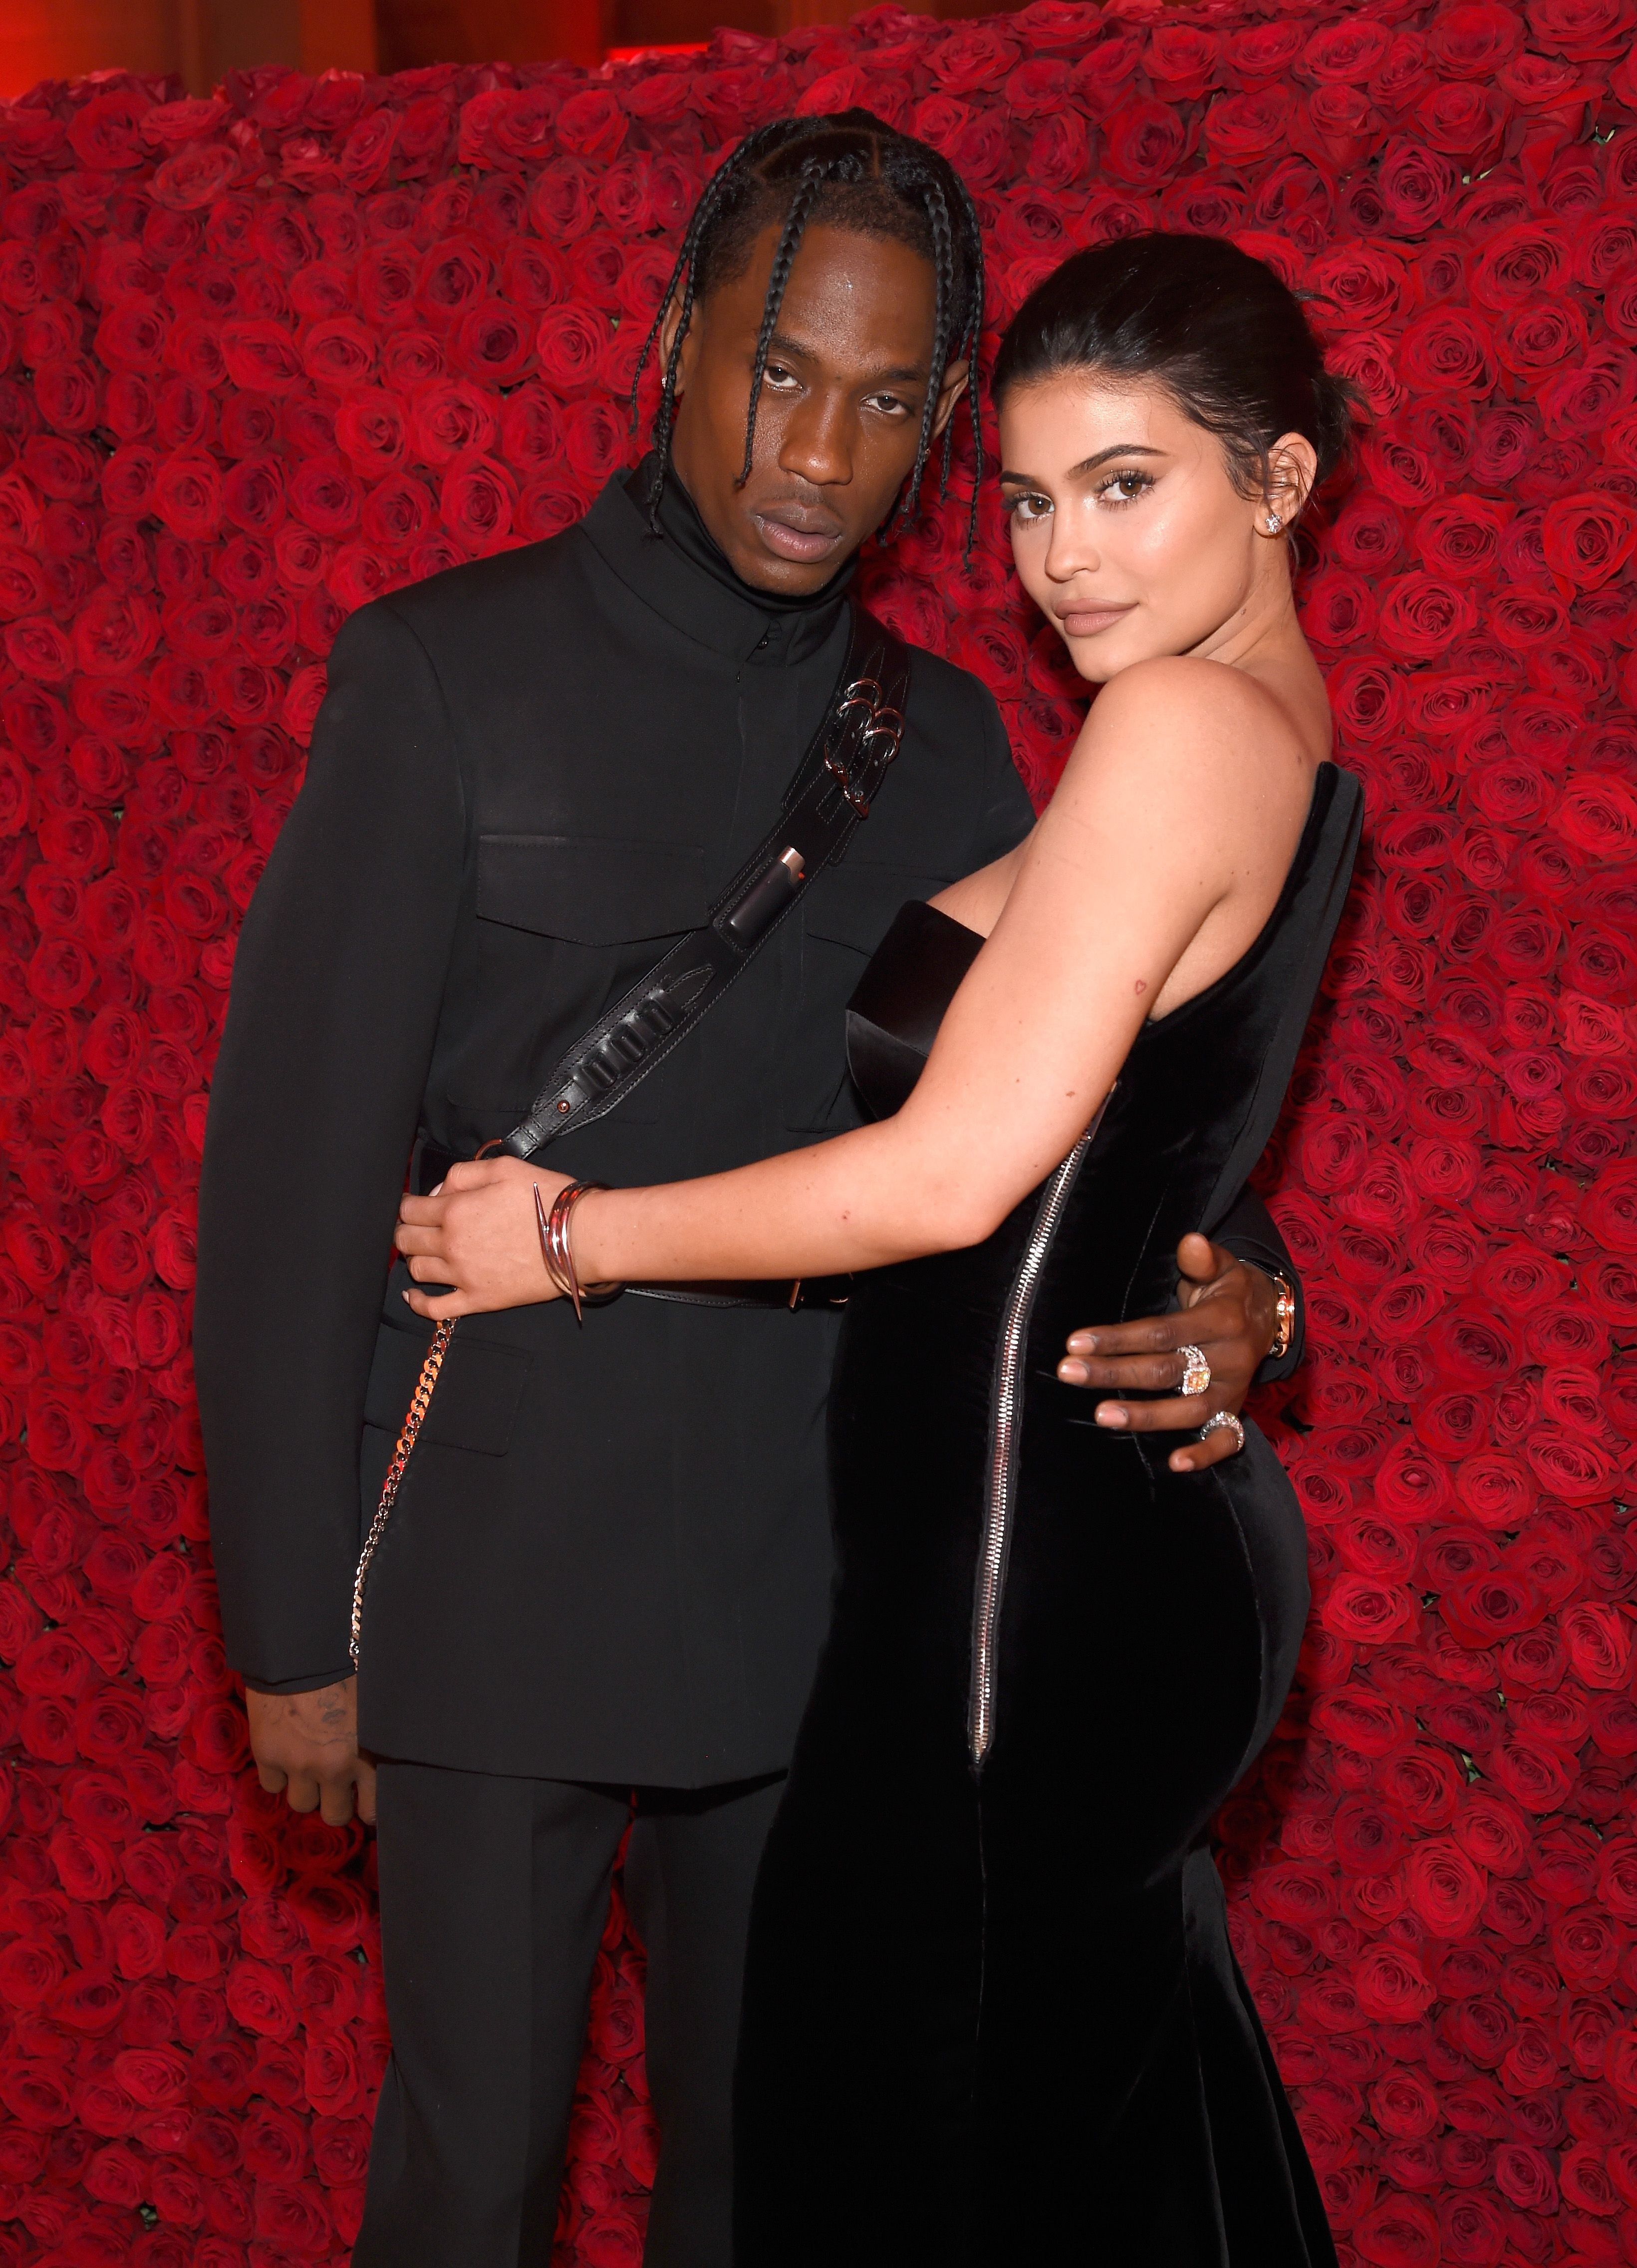 Travis Scott and Kylie Jenner at the Heavenly Bodies: Fashion & The Catholic Imagination Costume Institute Gala on May 7, 2018, in New York City | Photo: Kevin Mazur/MG18/Getty Images